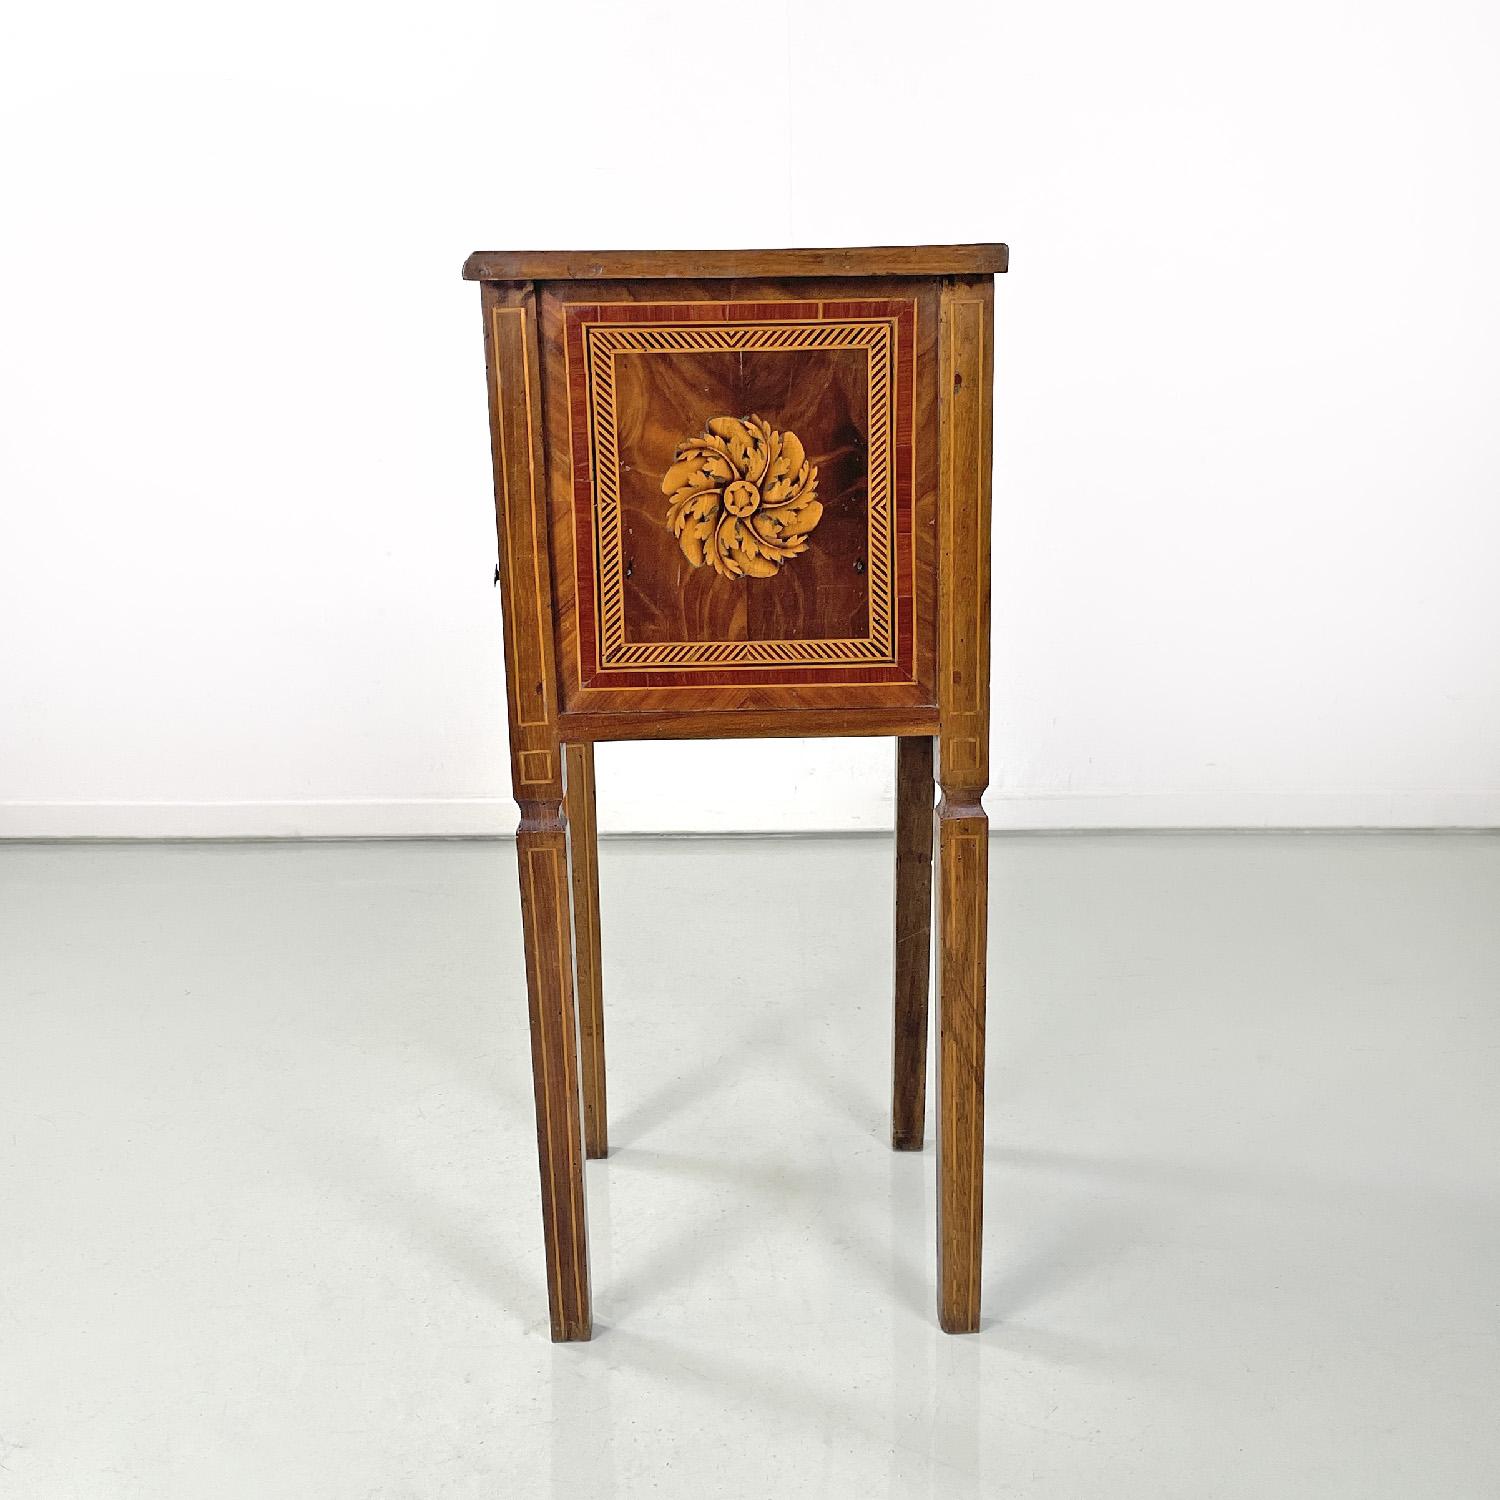 Wood Italian antique wooden bedside tables with inlaid floral decorations, 1750s For Sale